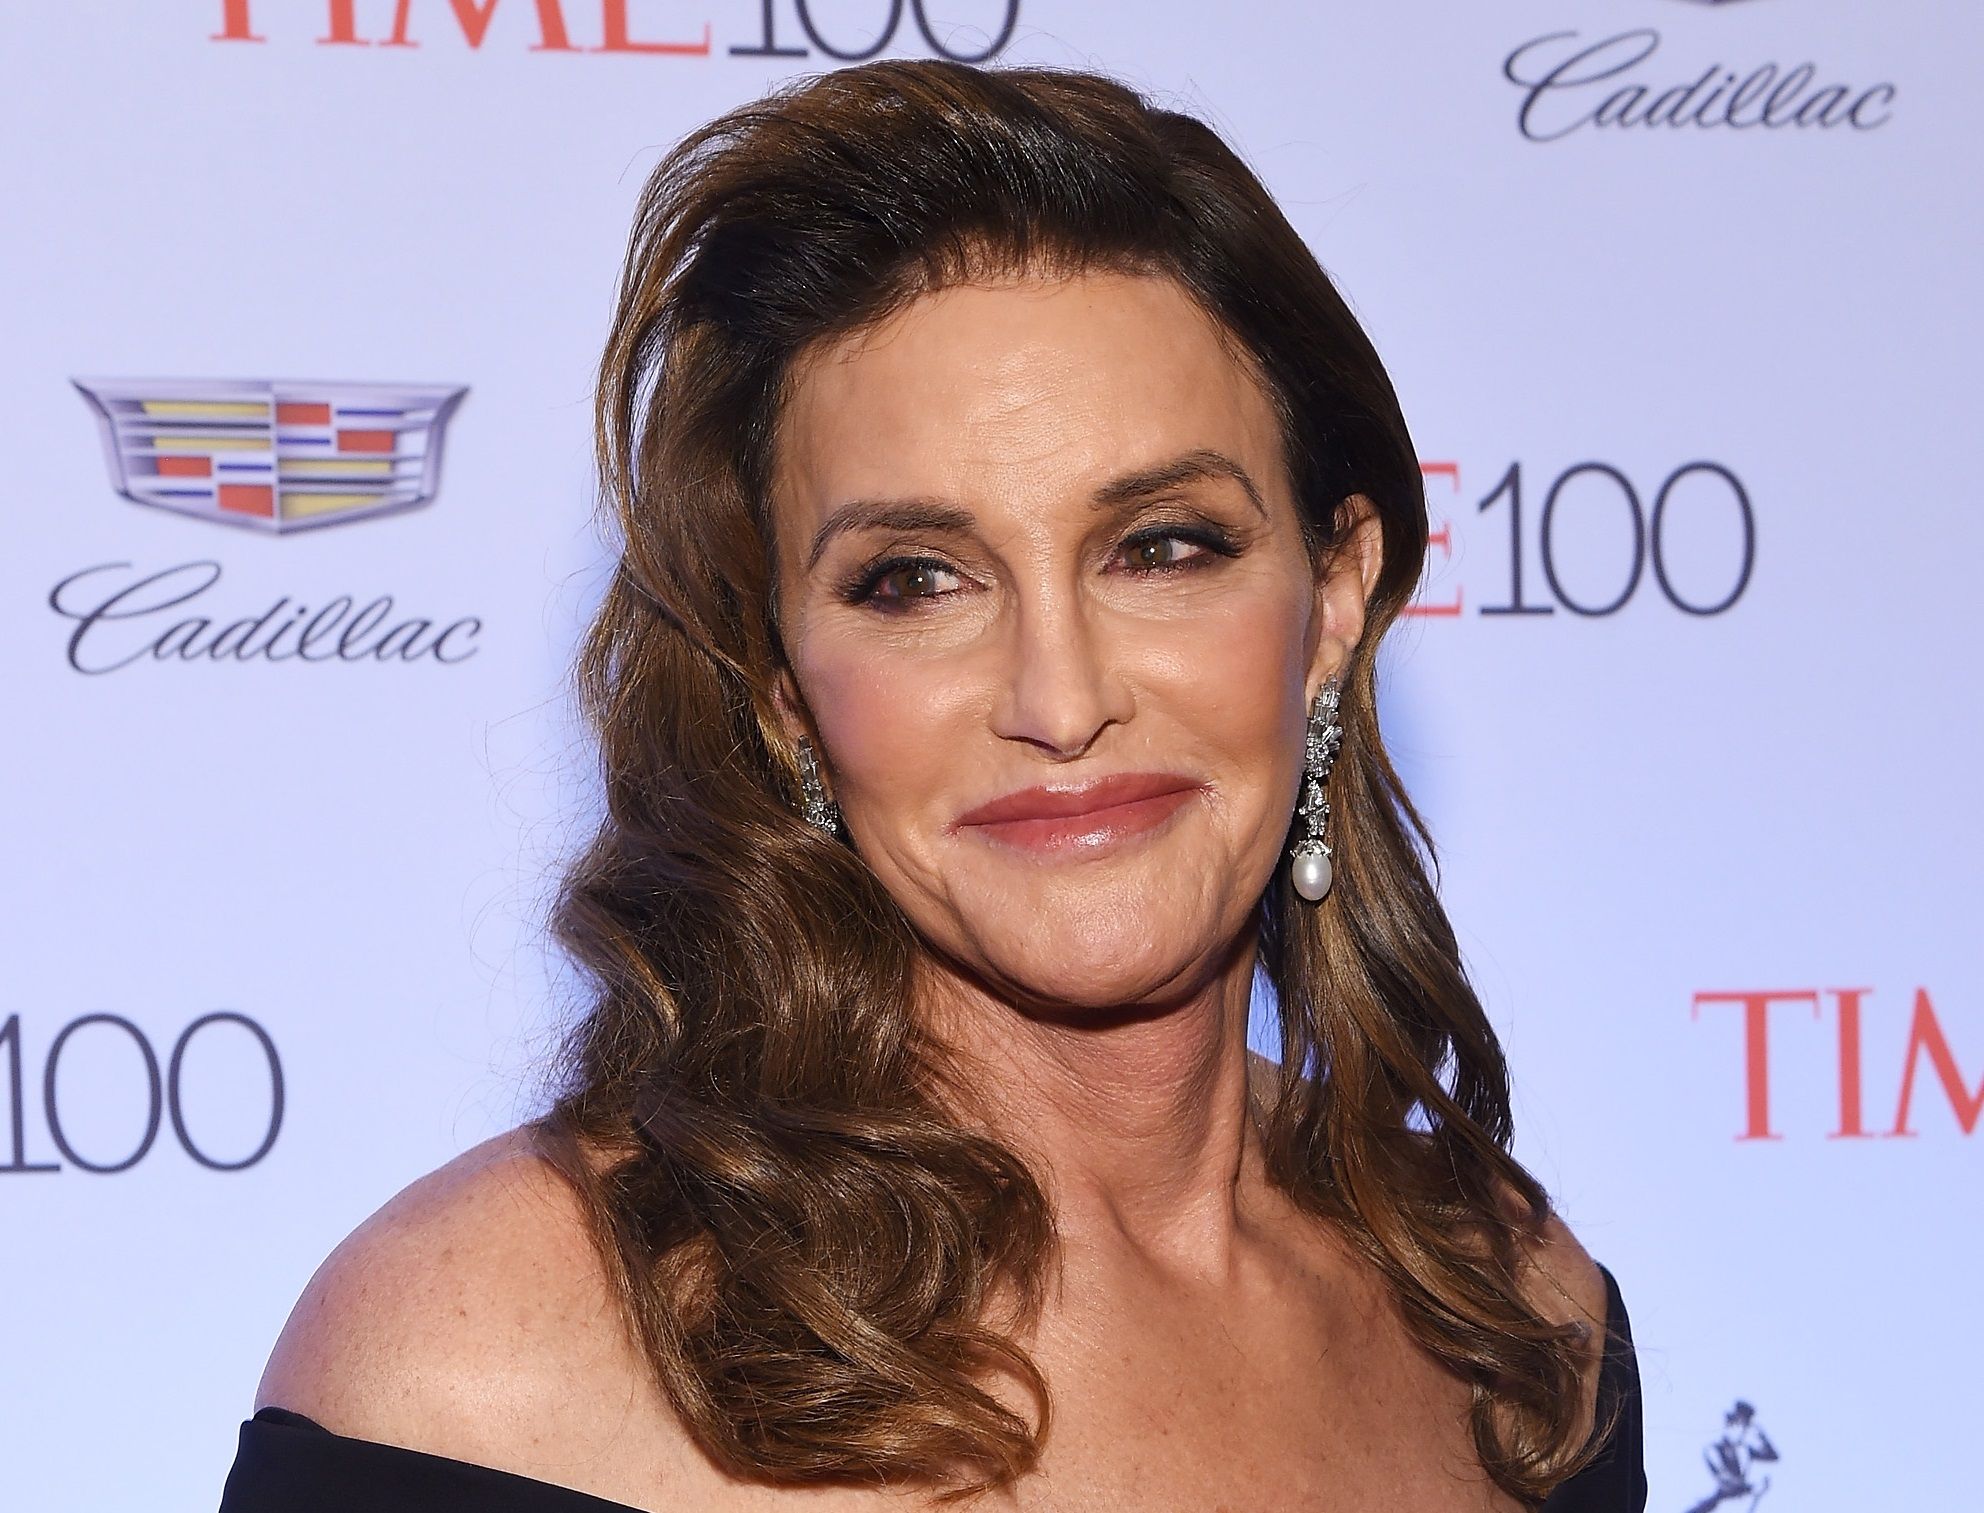 Caitlyn Jenner Regrets Transitioning To A Woman Wants To Become Bruce